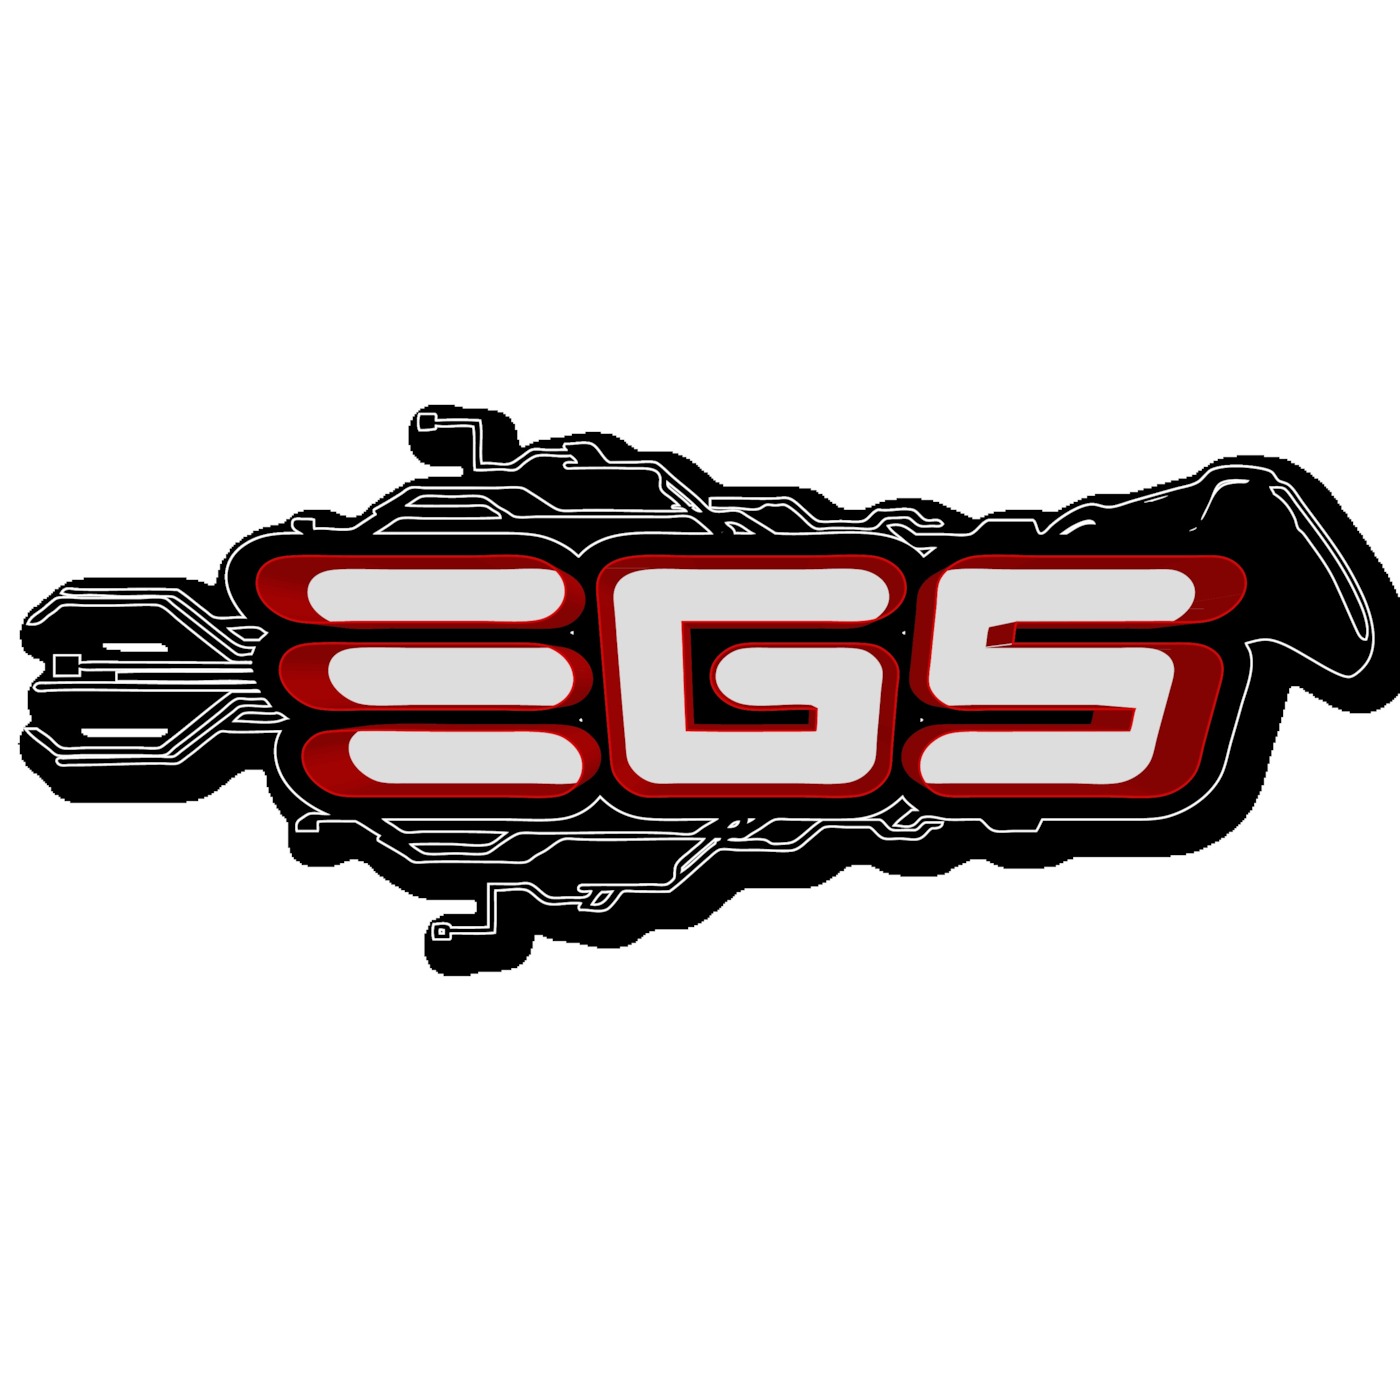 EGS Productions Podcast